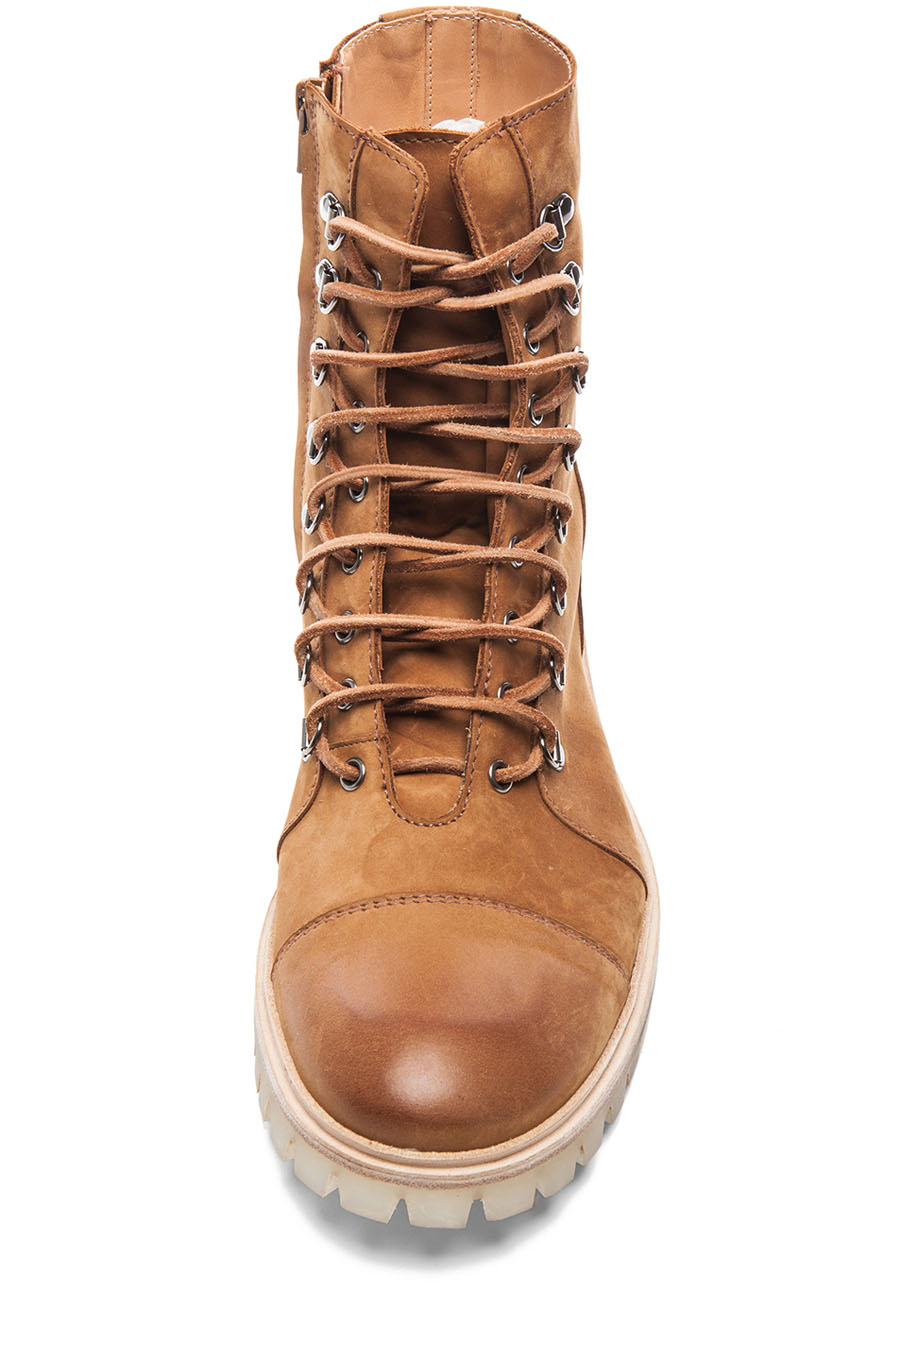 Honey Suede Lace-Up Boot Maison Martin 4